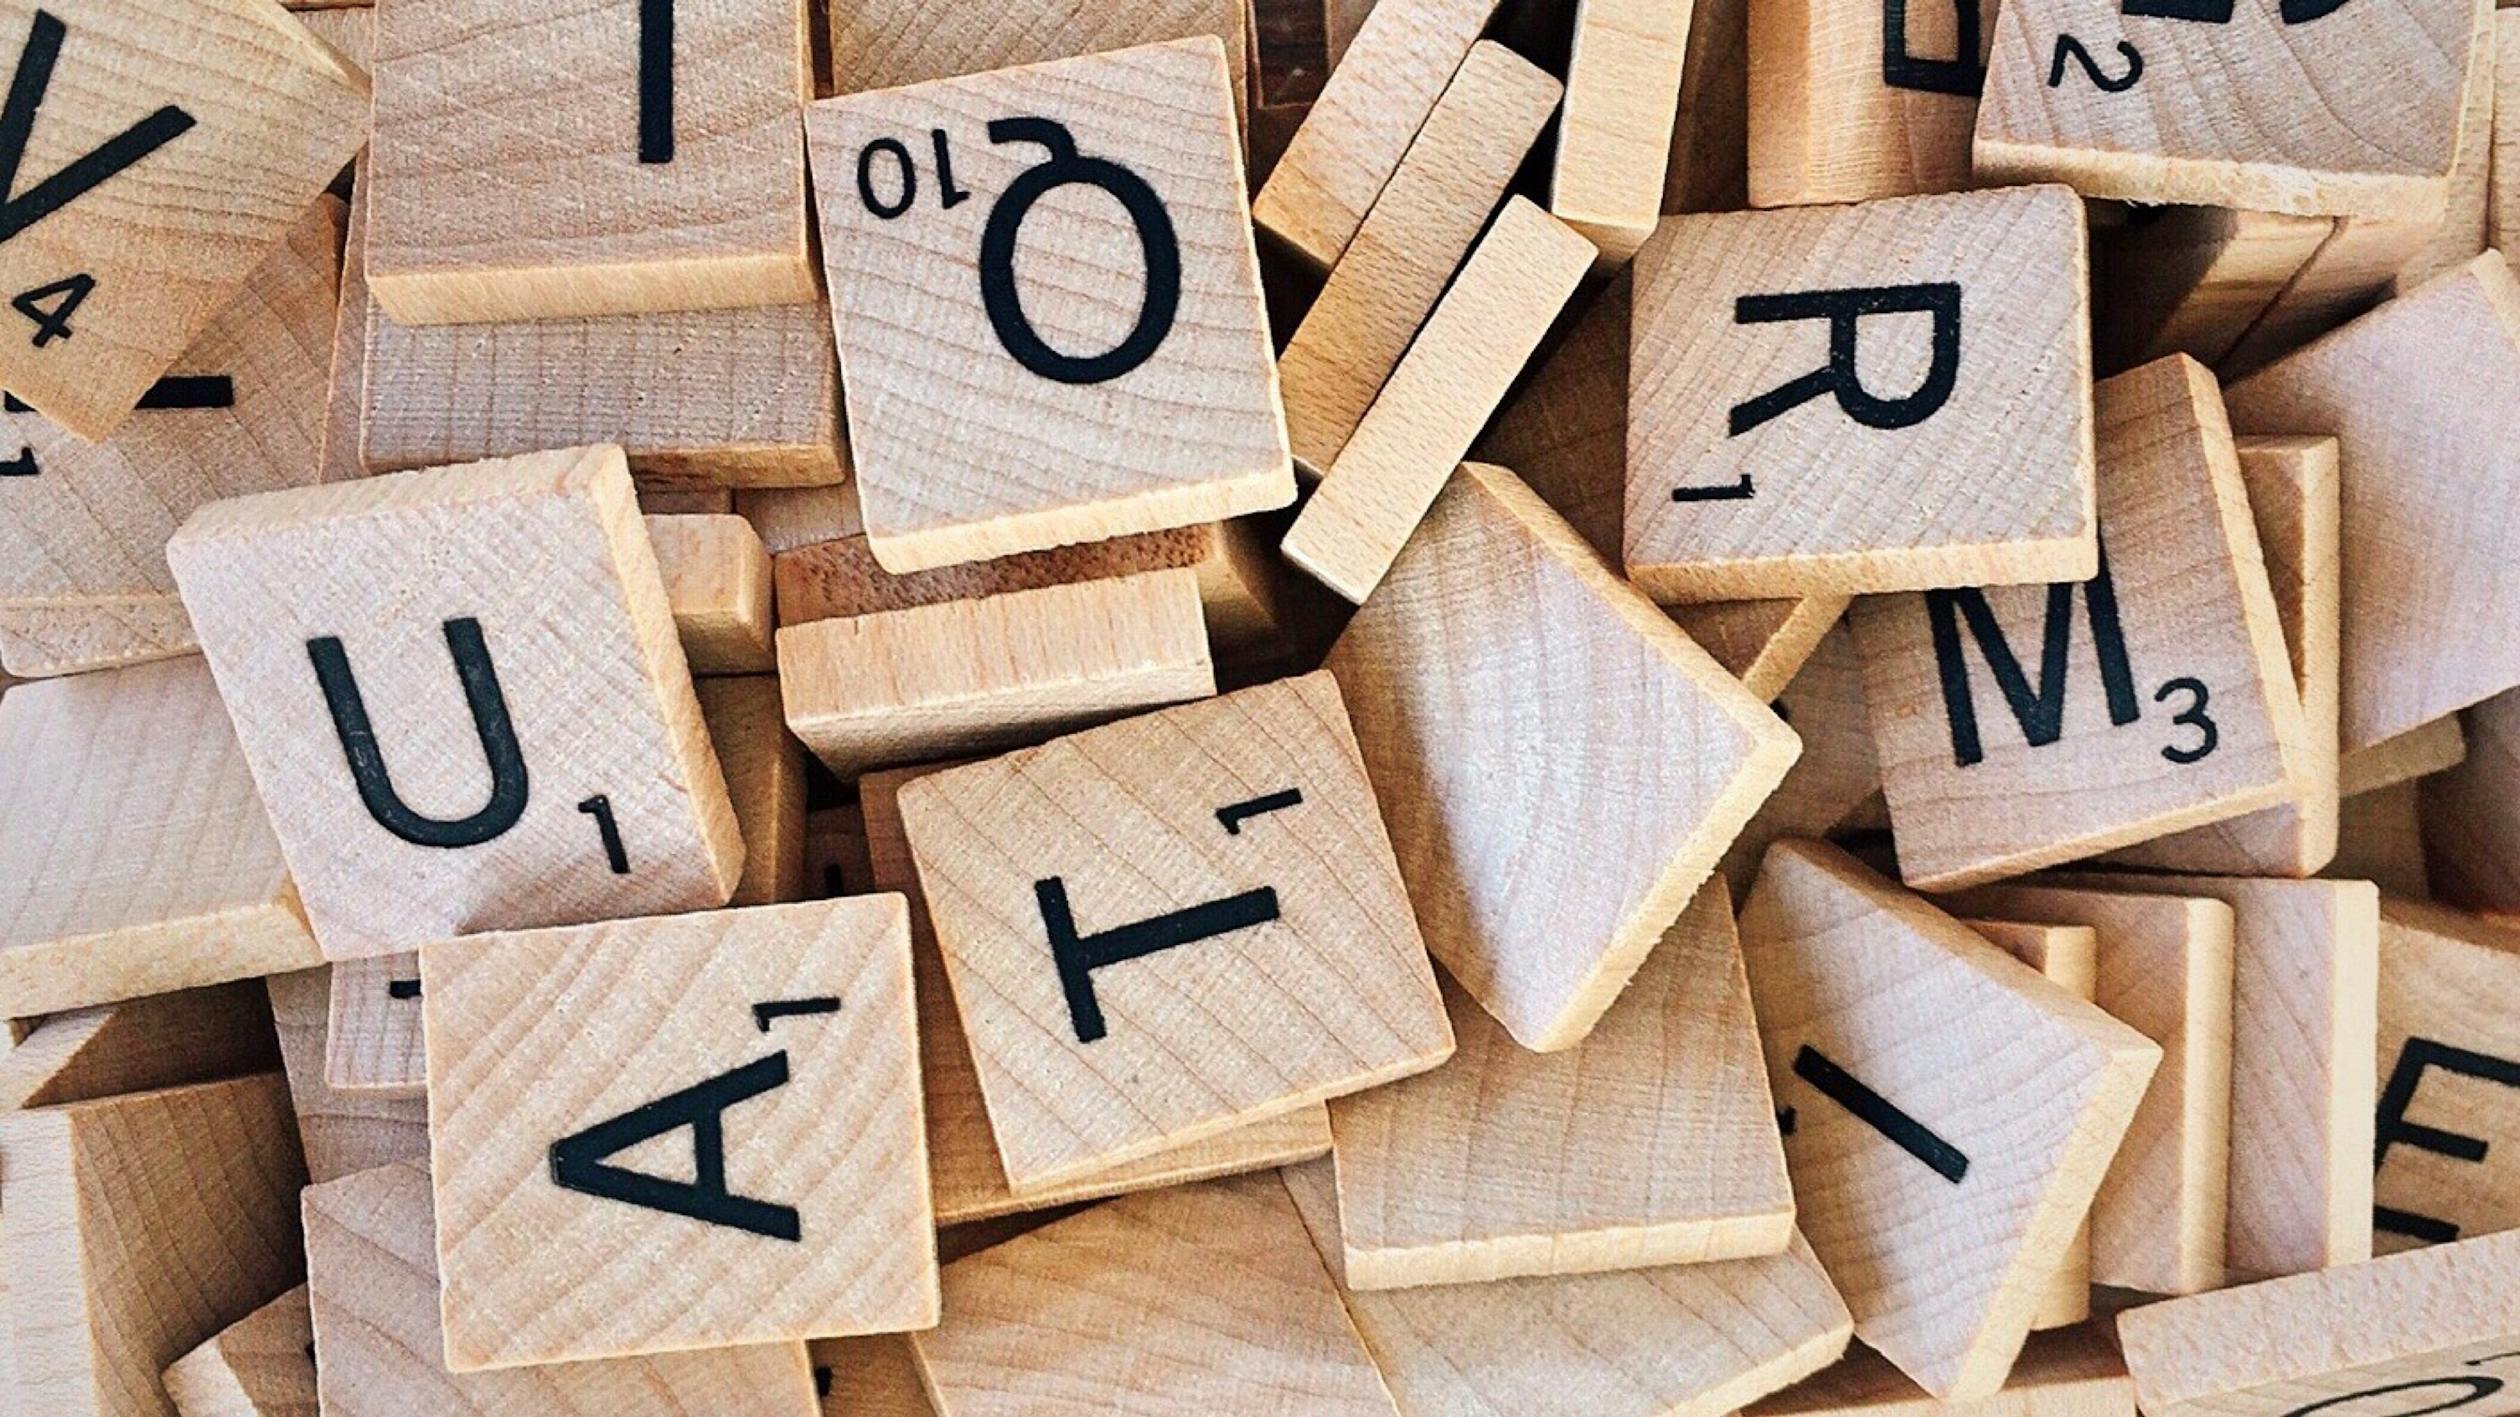 pile-of-scrabble-letter-pieces-free-stock-photo